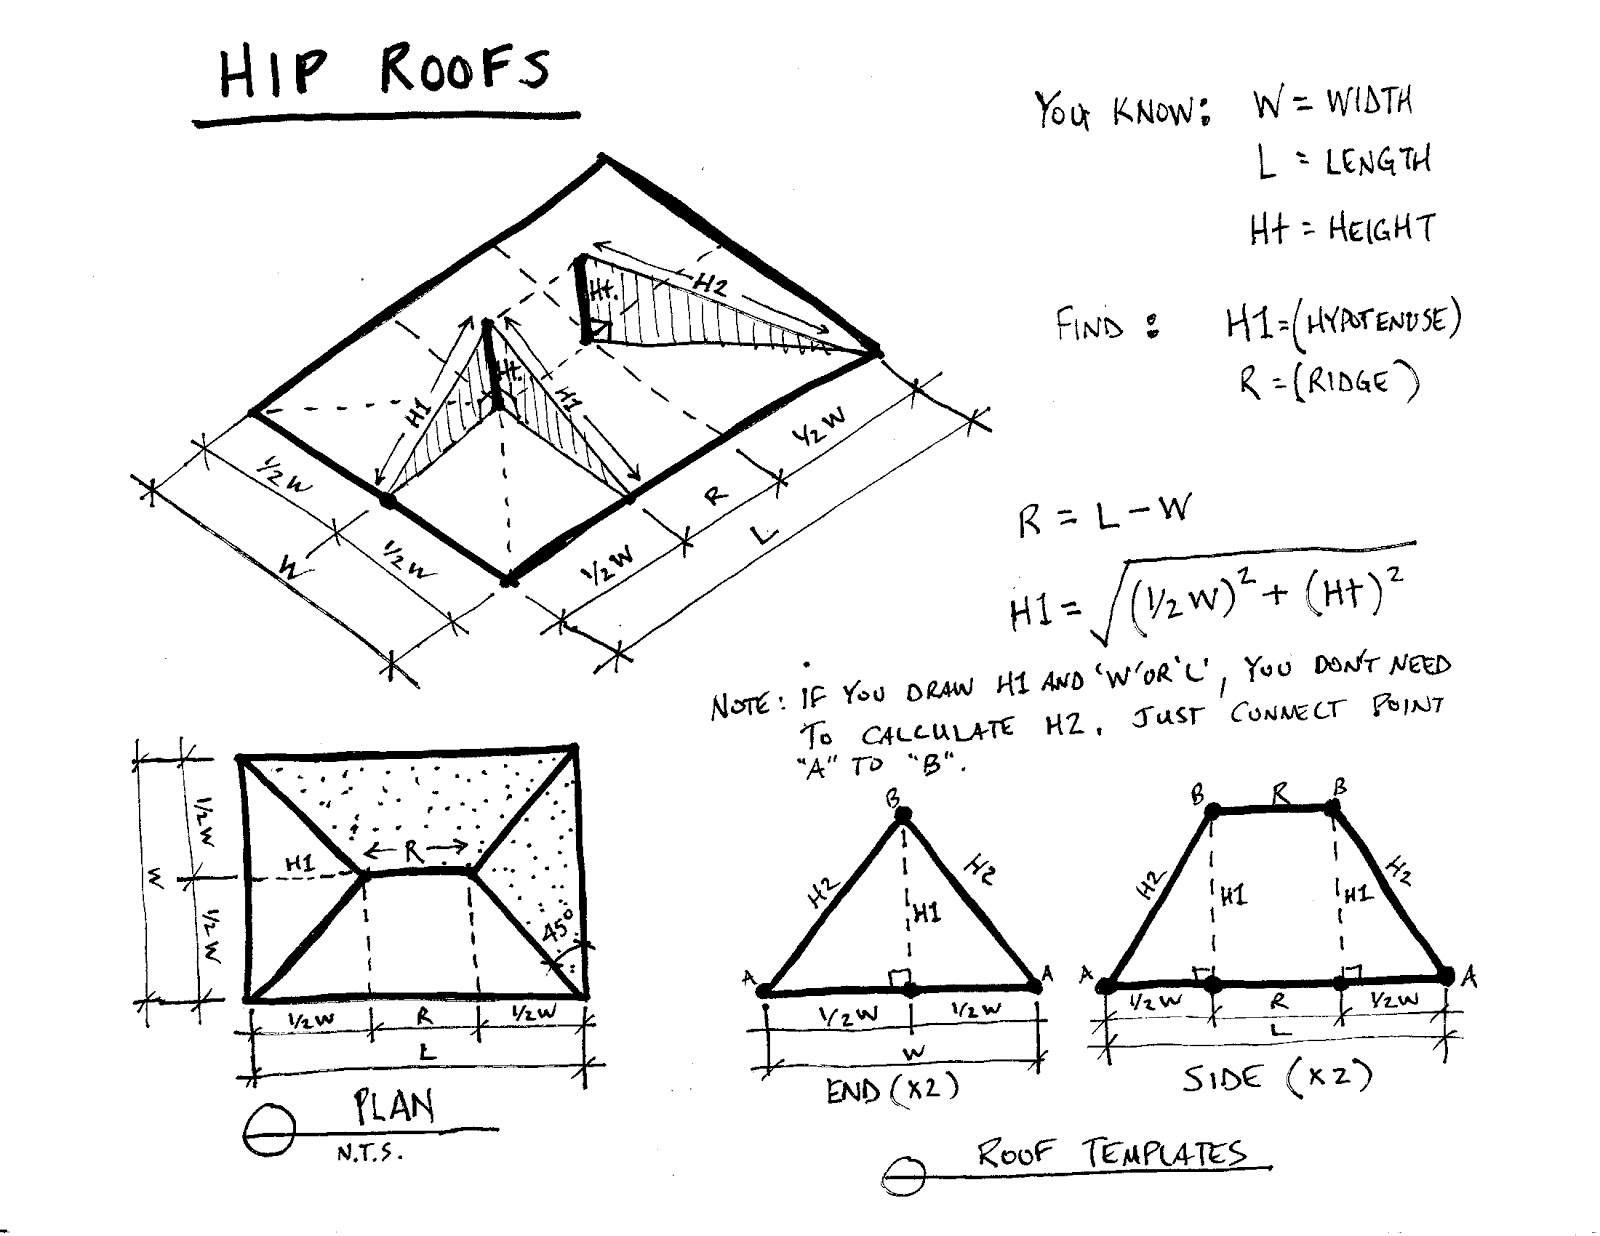 Gamer Architect Hip Roofs Simpler than you might think 